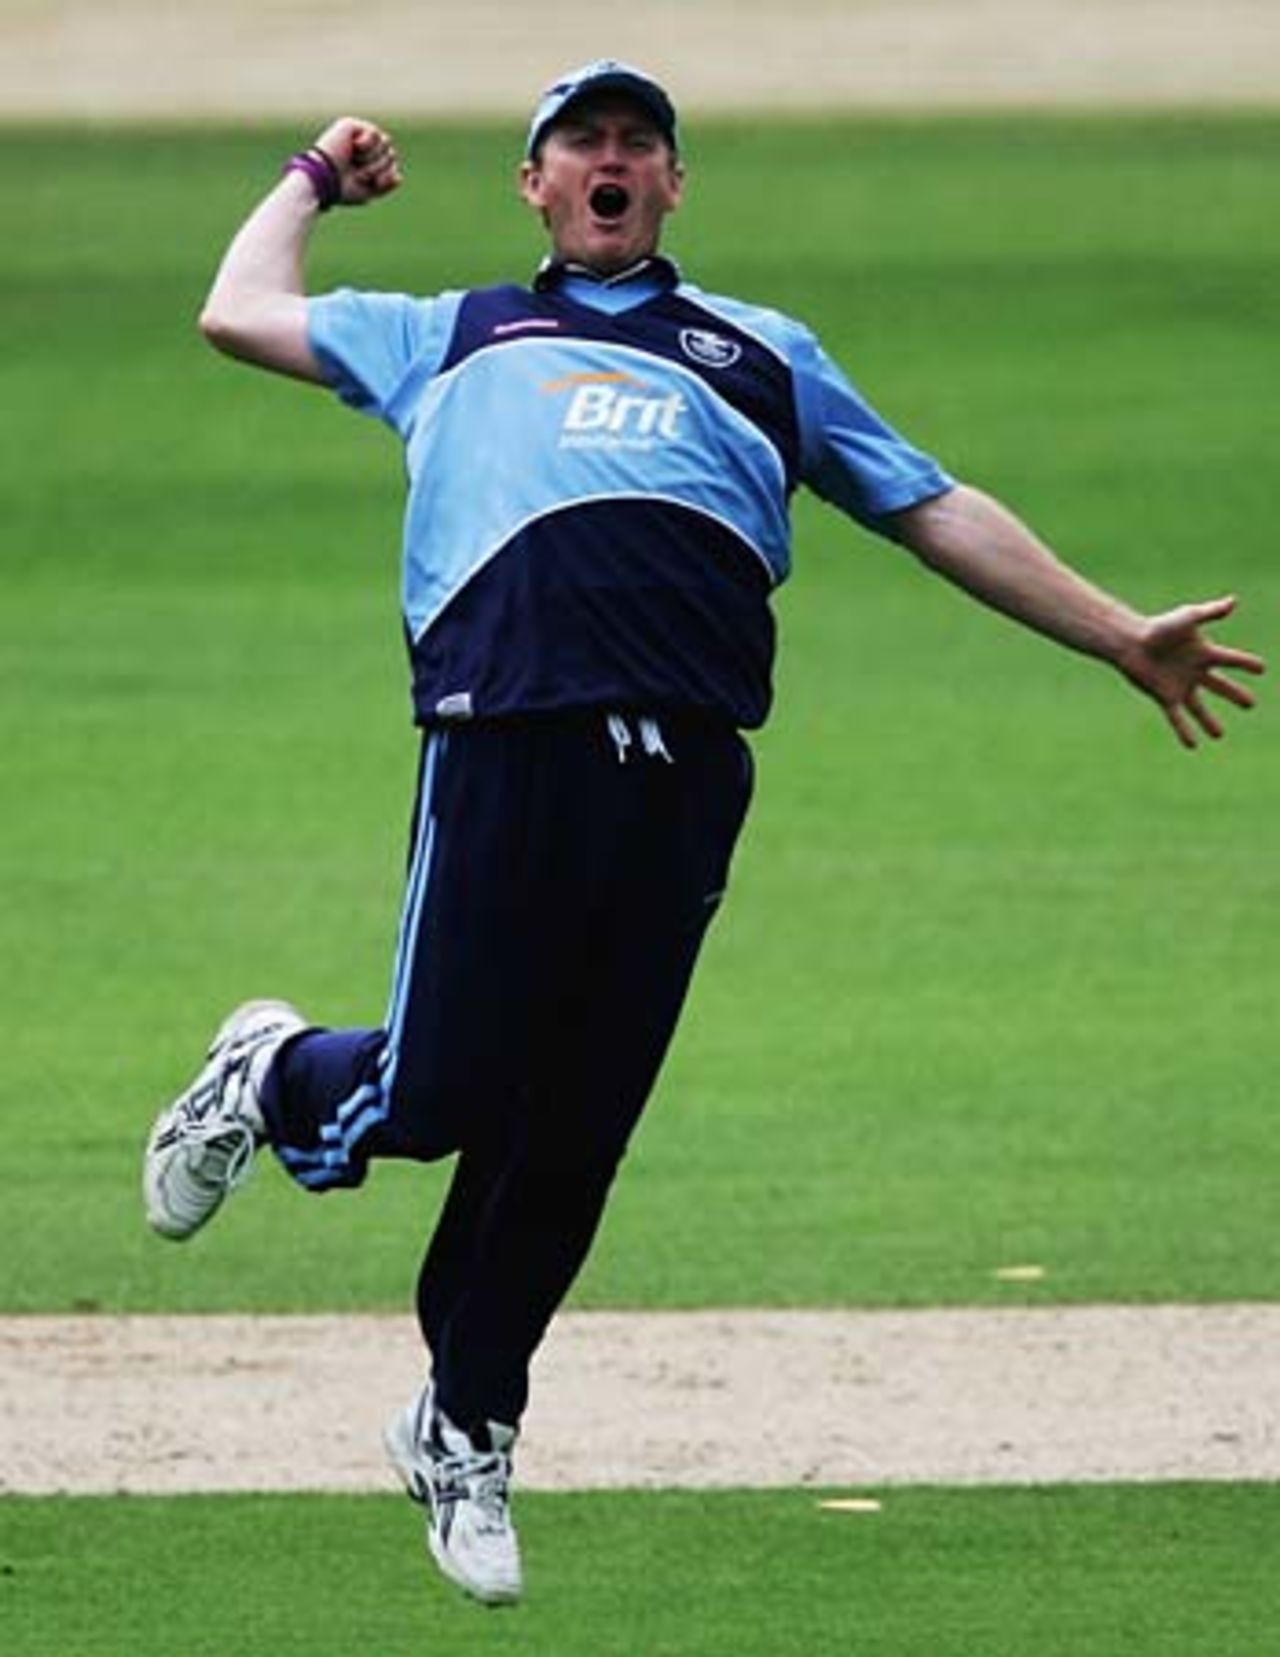 Ali Brown celebrates after catching Ed Smith, Surrey v Middlesex, The Oval, June 28, 2005